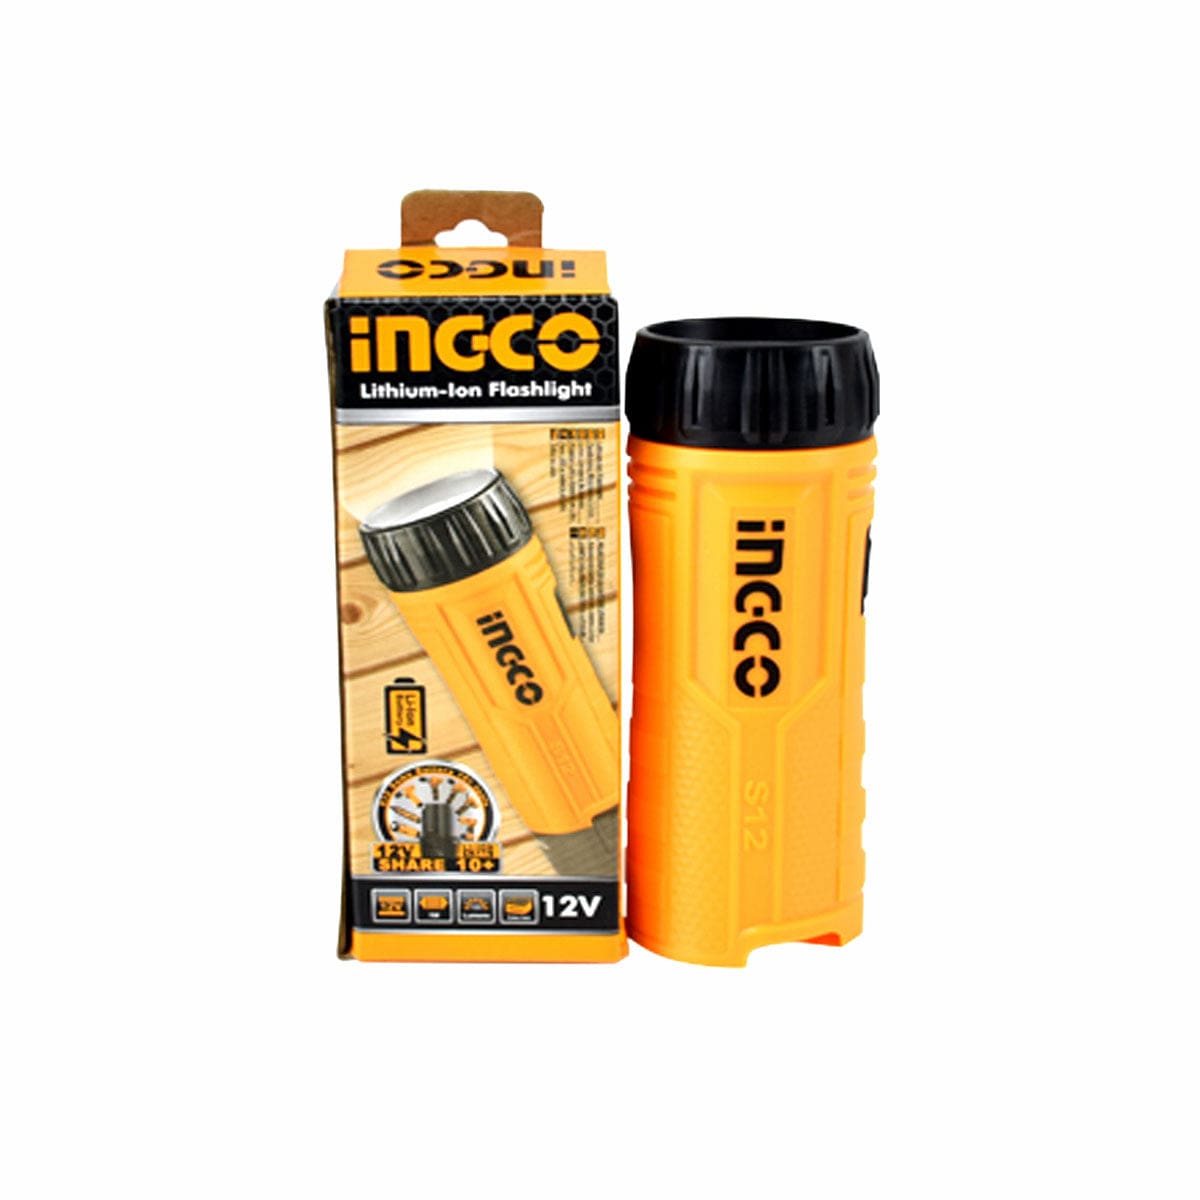 Ingco Lithium-Ion Flashlight 12V - CWLI1201 | Shop Online in Accra, Ghana - Supply Master Specialty Safety Equipment Buy Tools hardware Building materials